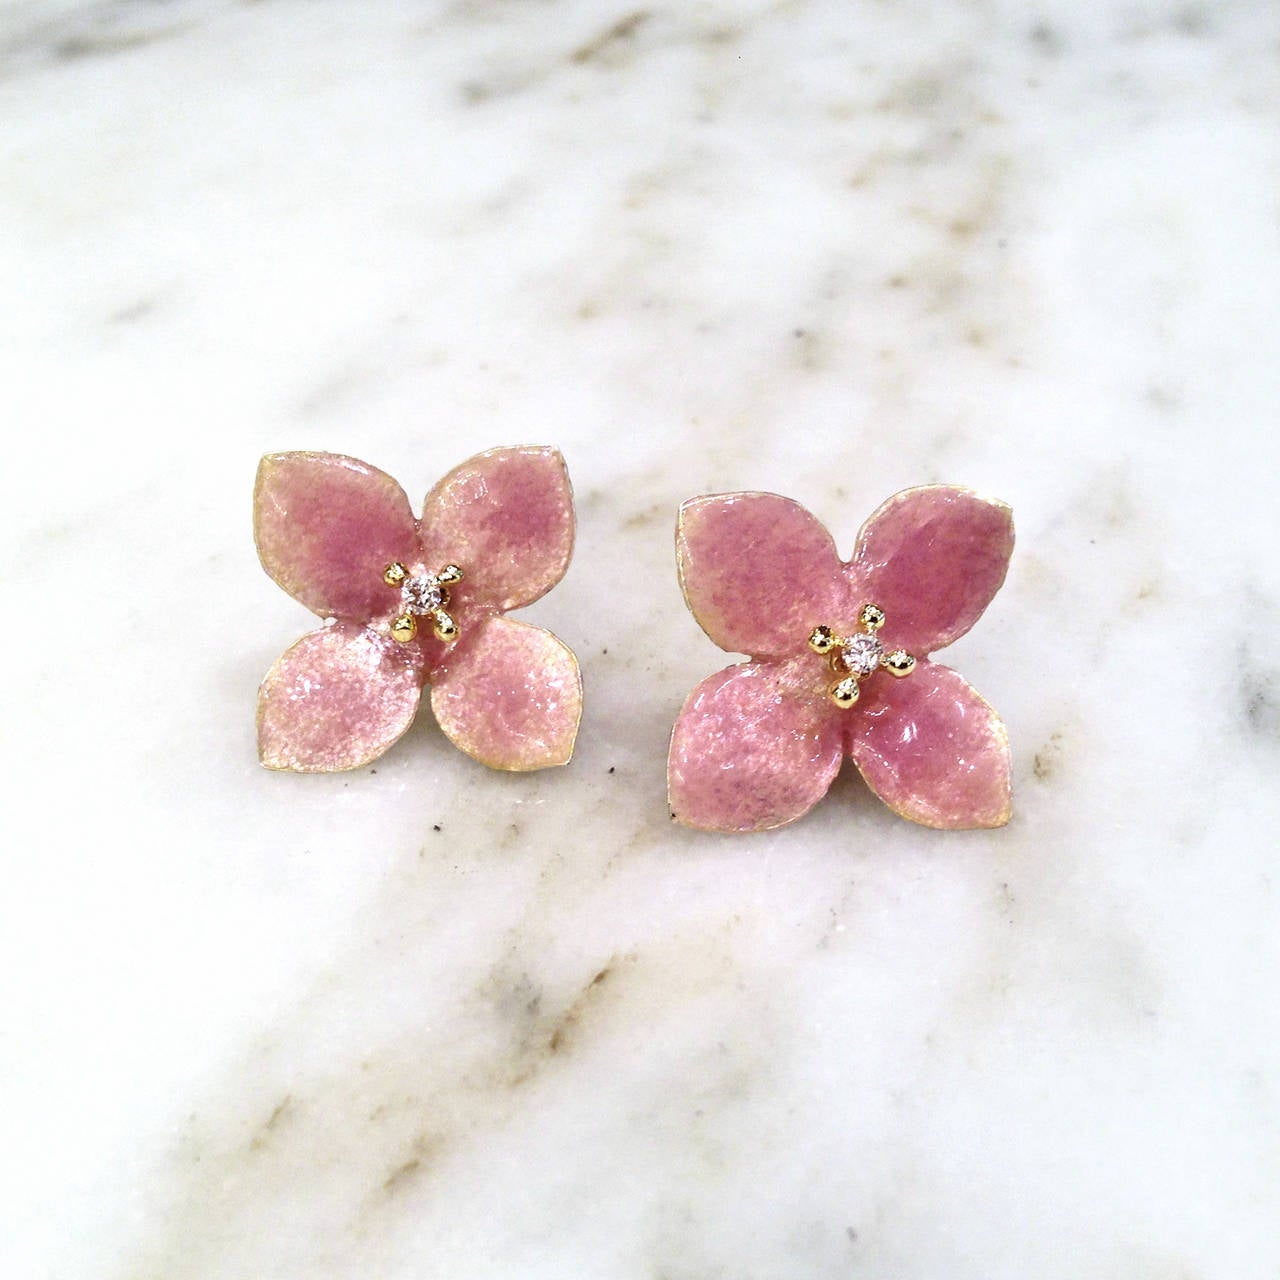 Blossom Earrings handcrafted with kiln-fired pink enamel petals accented by 0.10 total carats of white diamonds set in 18k yellow gold on 18k yellow gold posts.